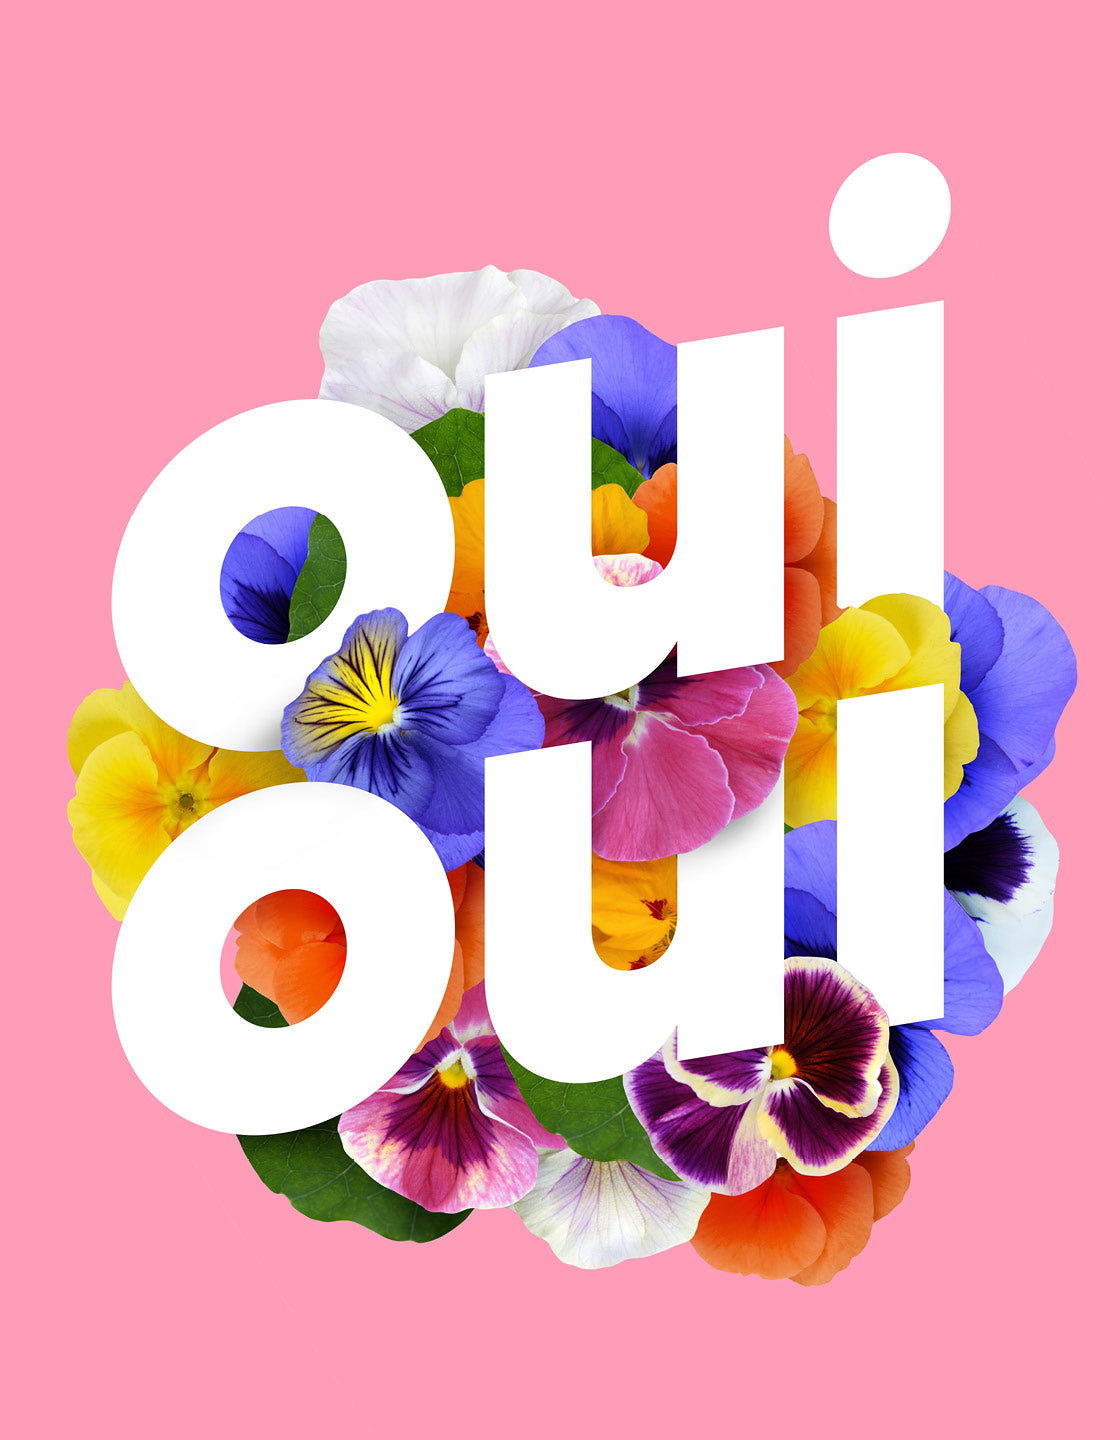 Oui Oui typography with pink background and flowers